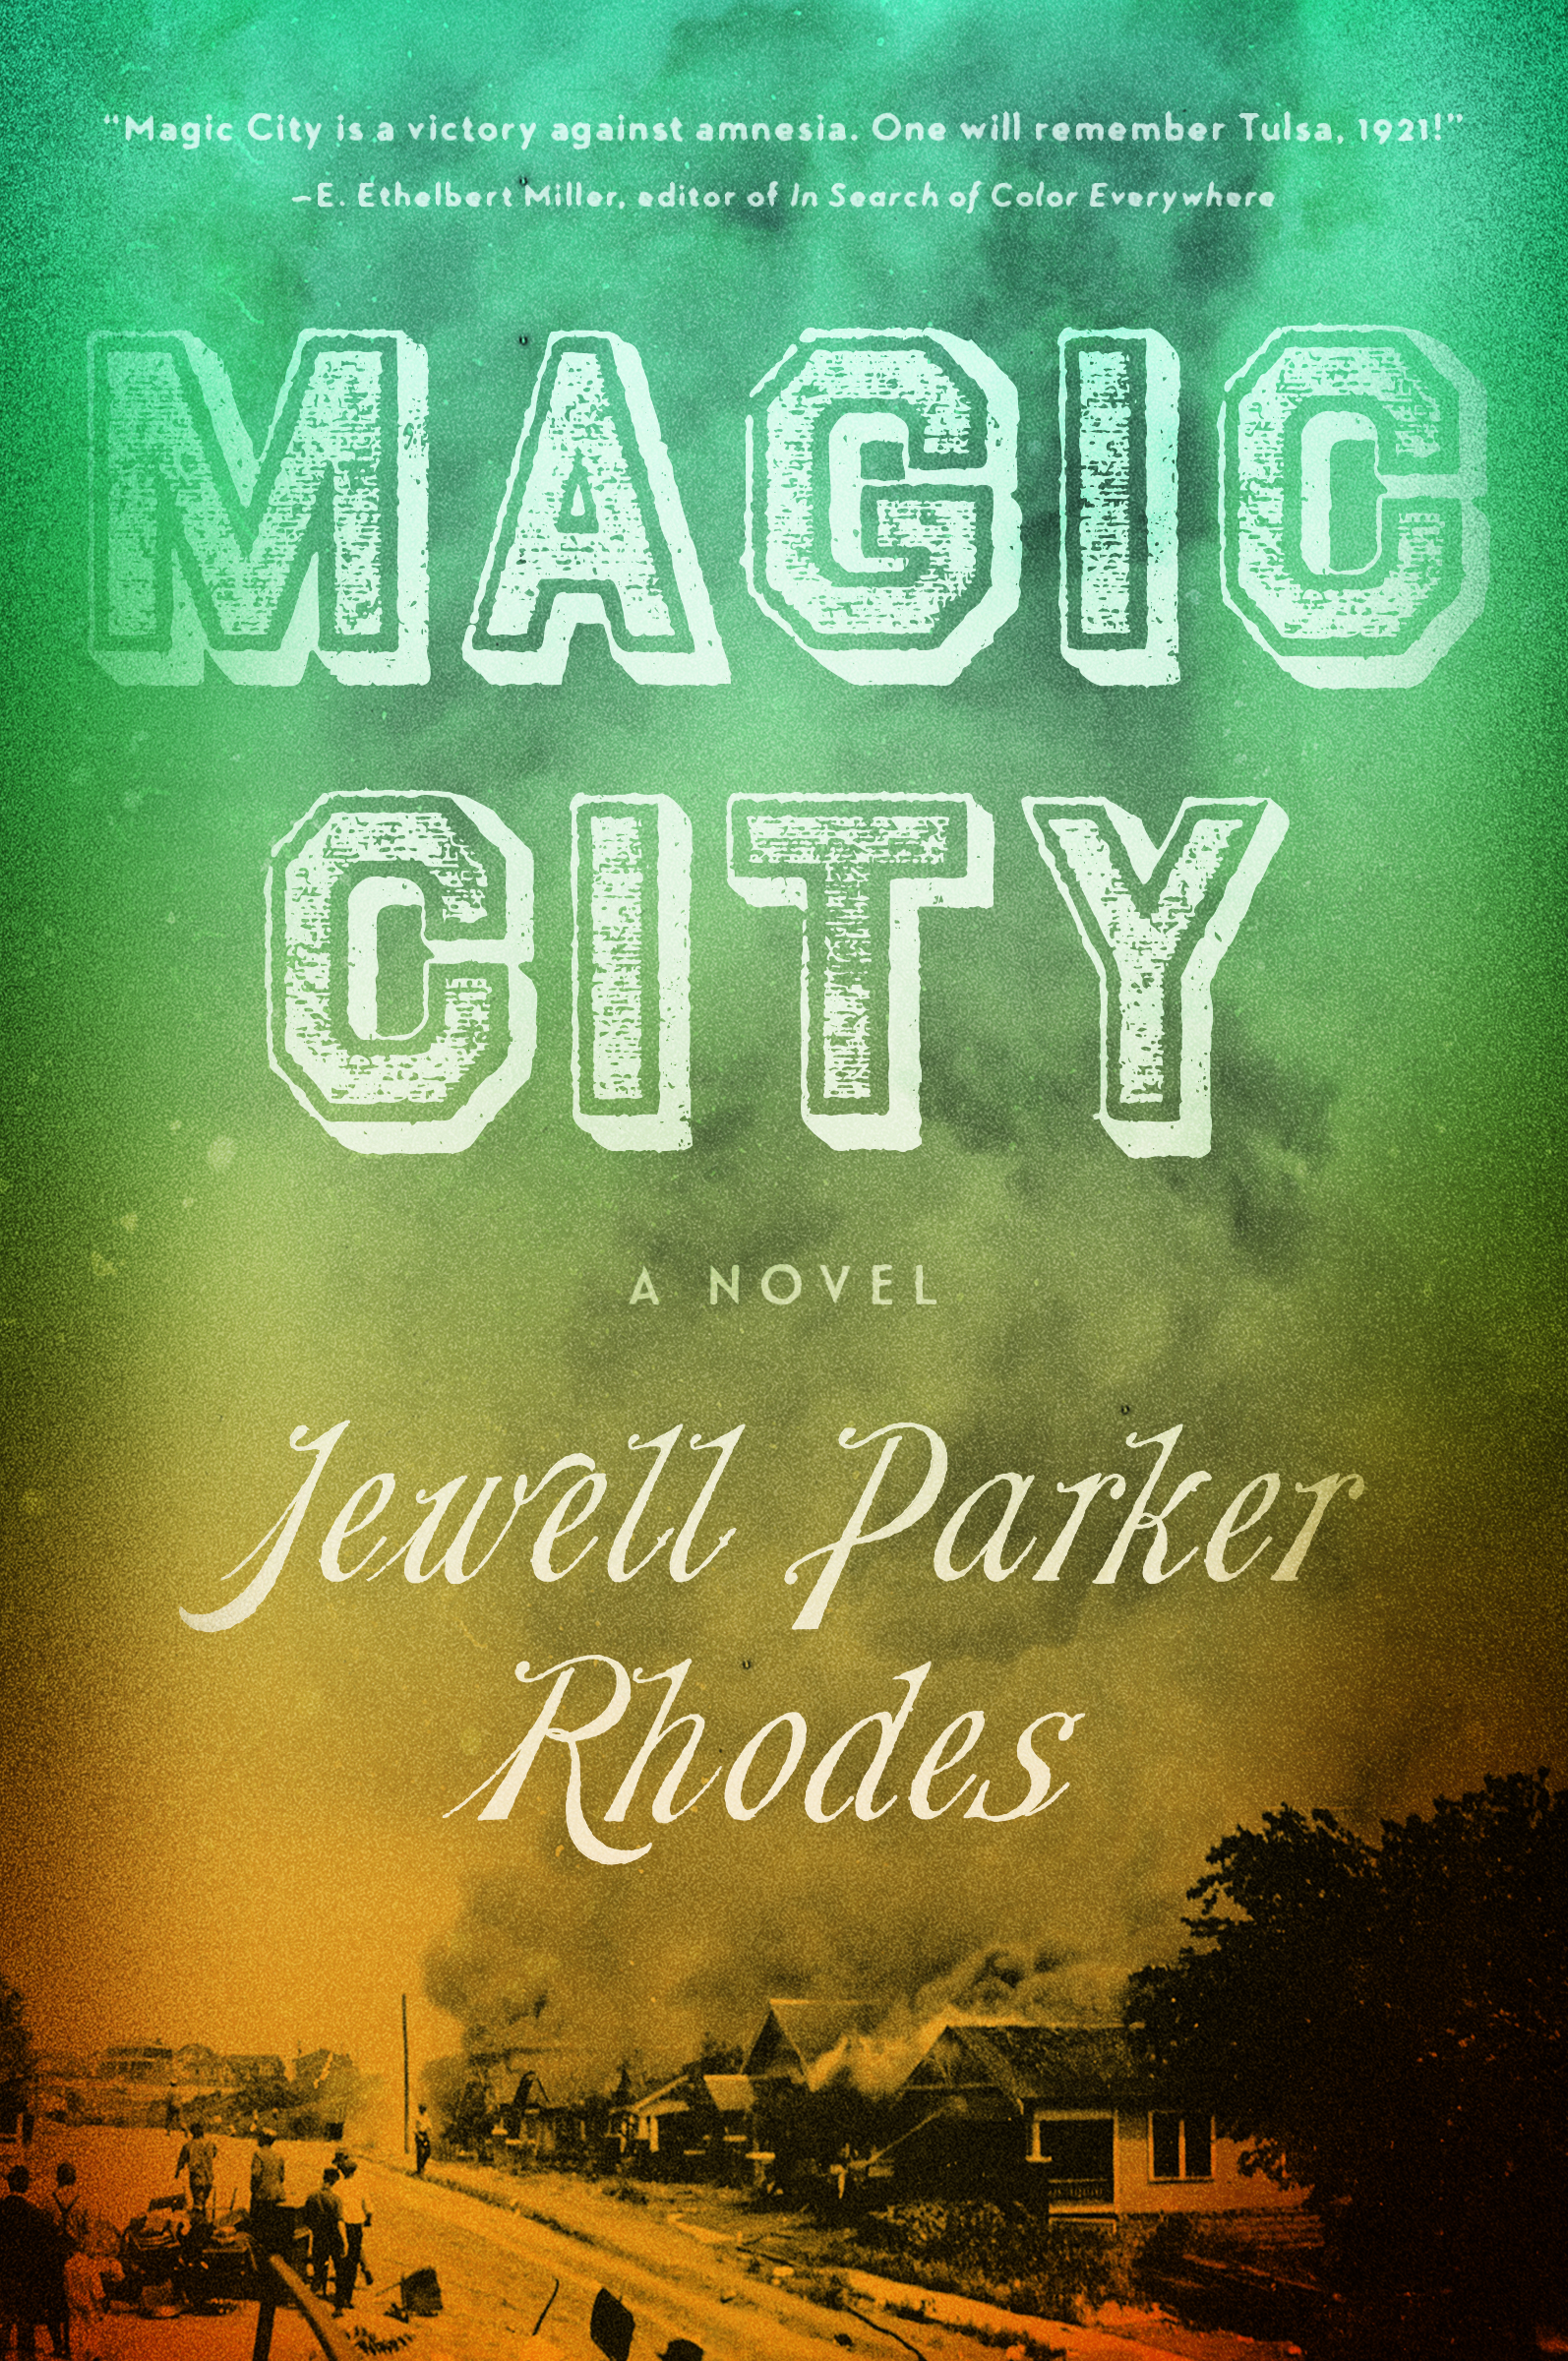 Magic City by Jewell Parker Rhodes